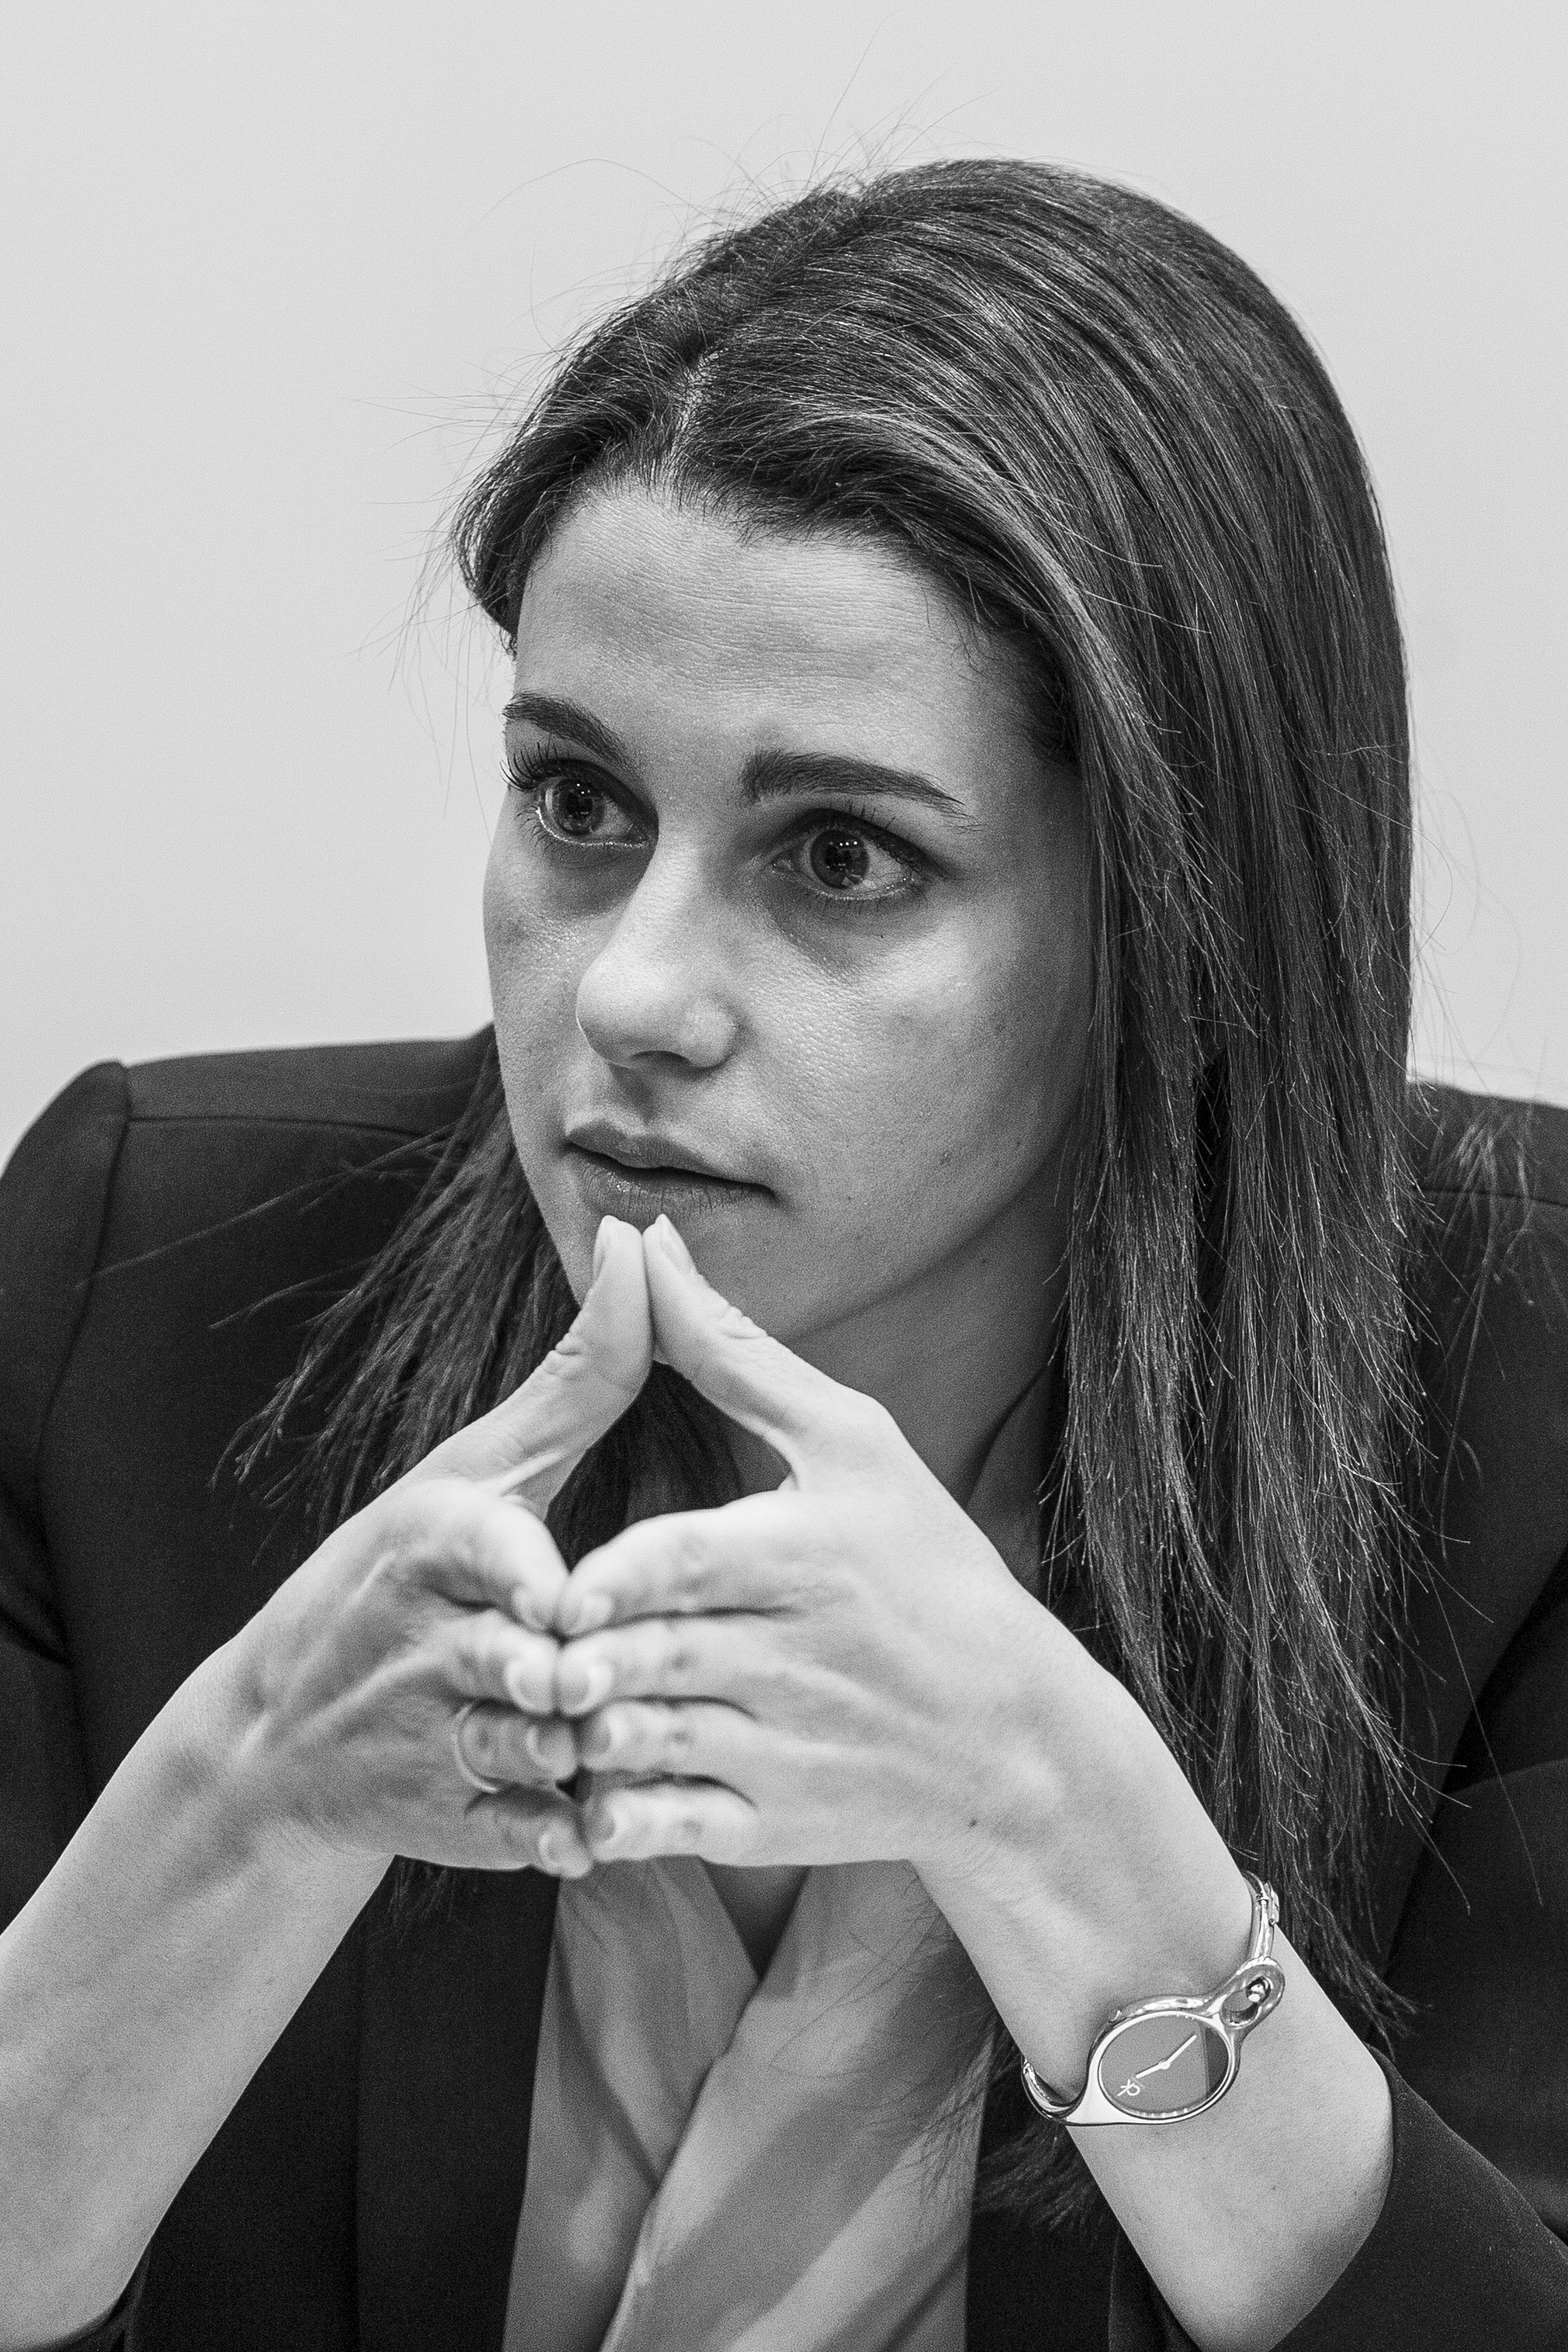 Inés Arrimadas, the beneficiary of the independence process